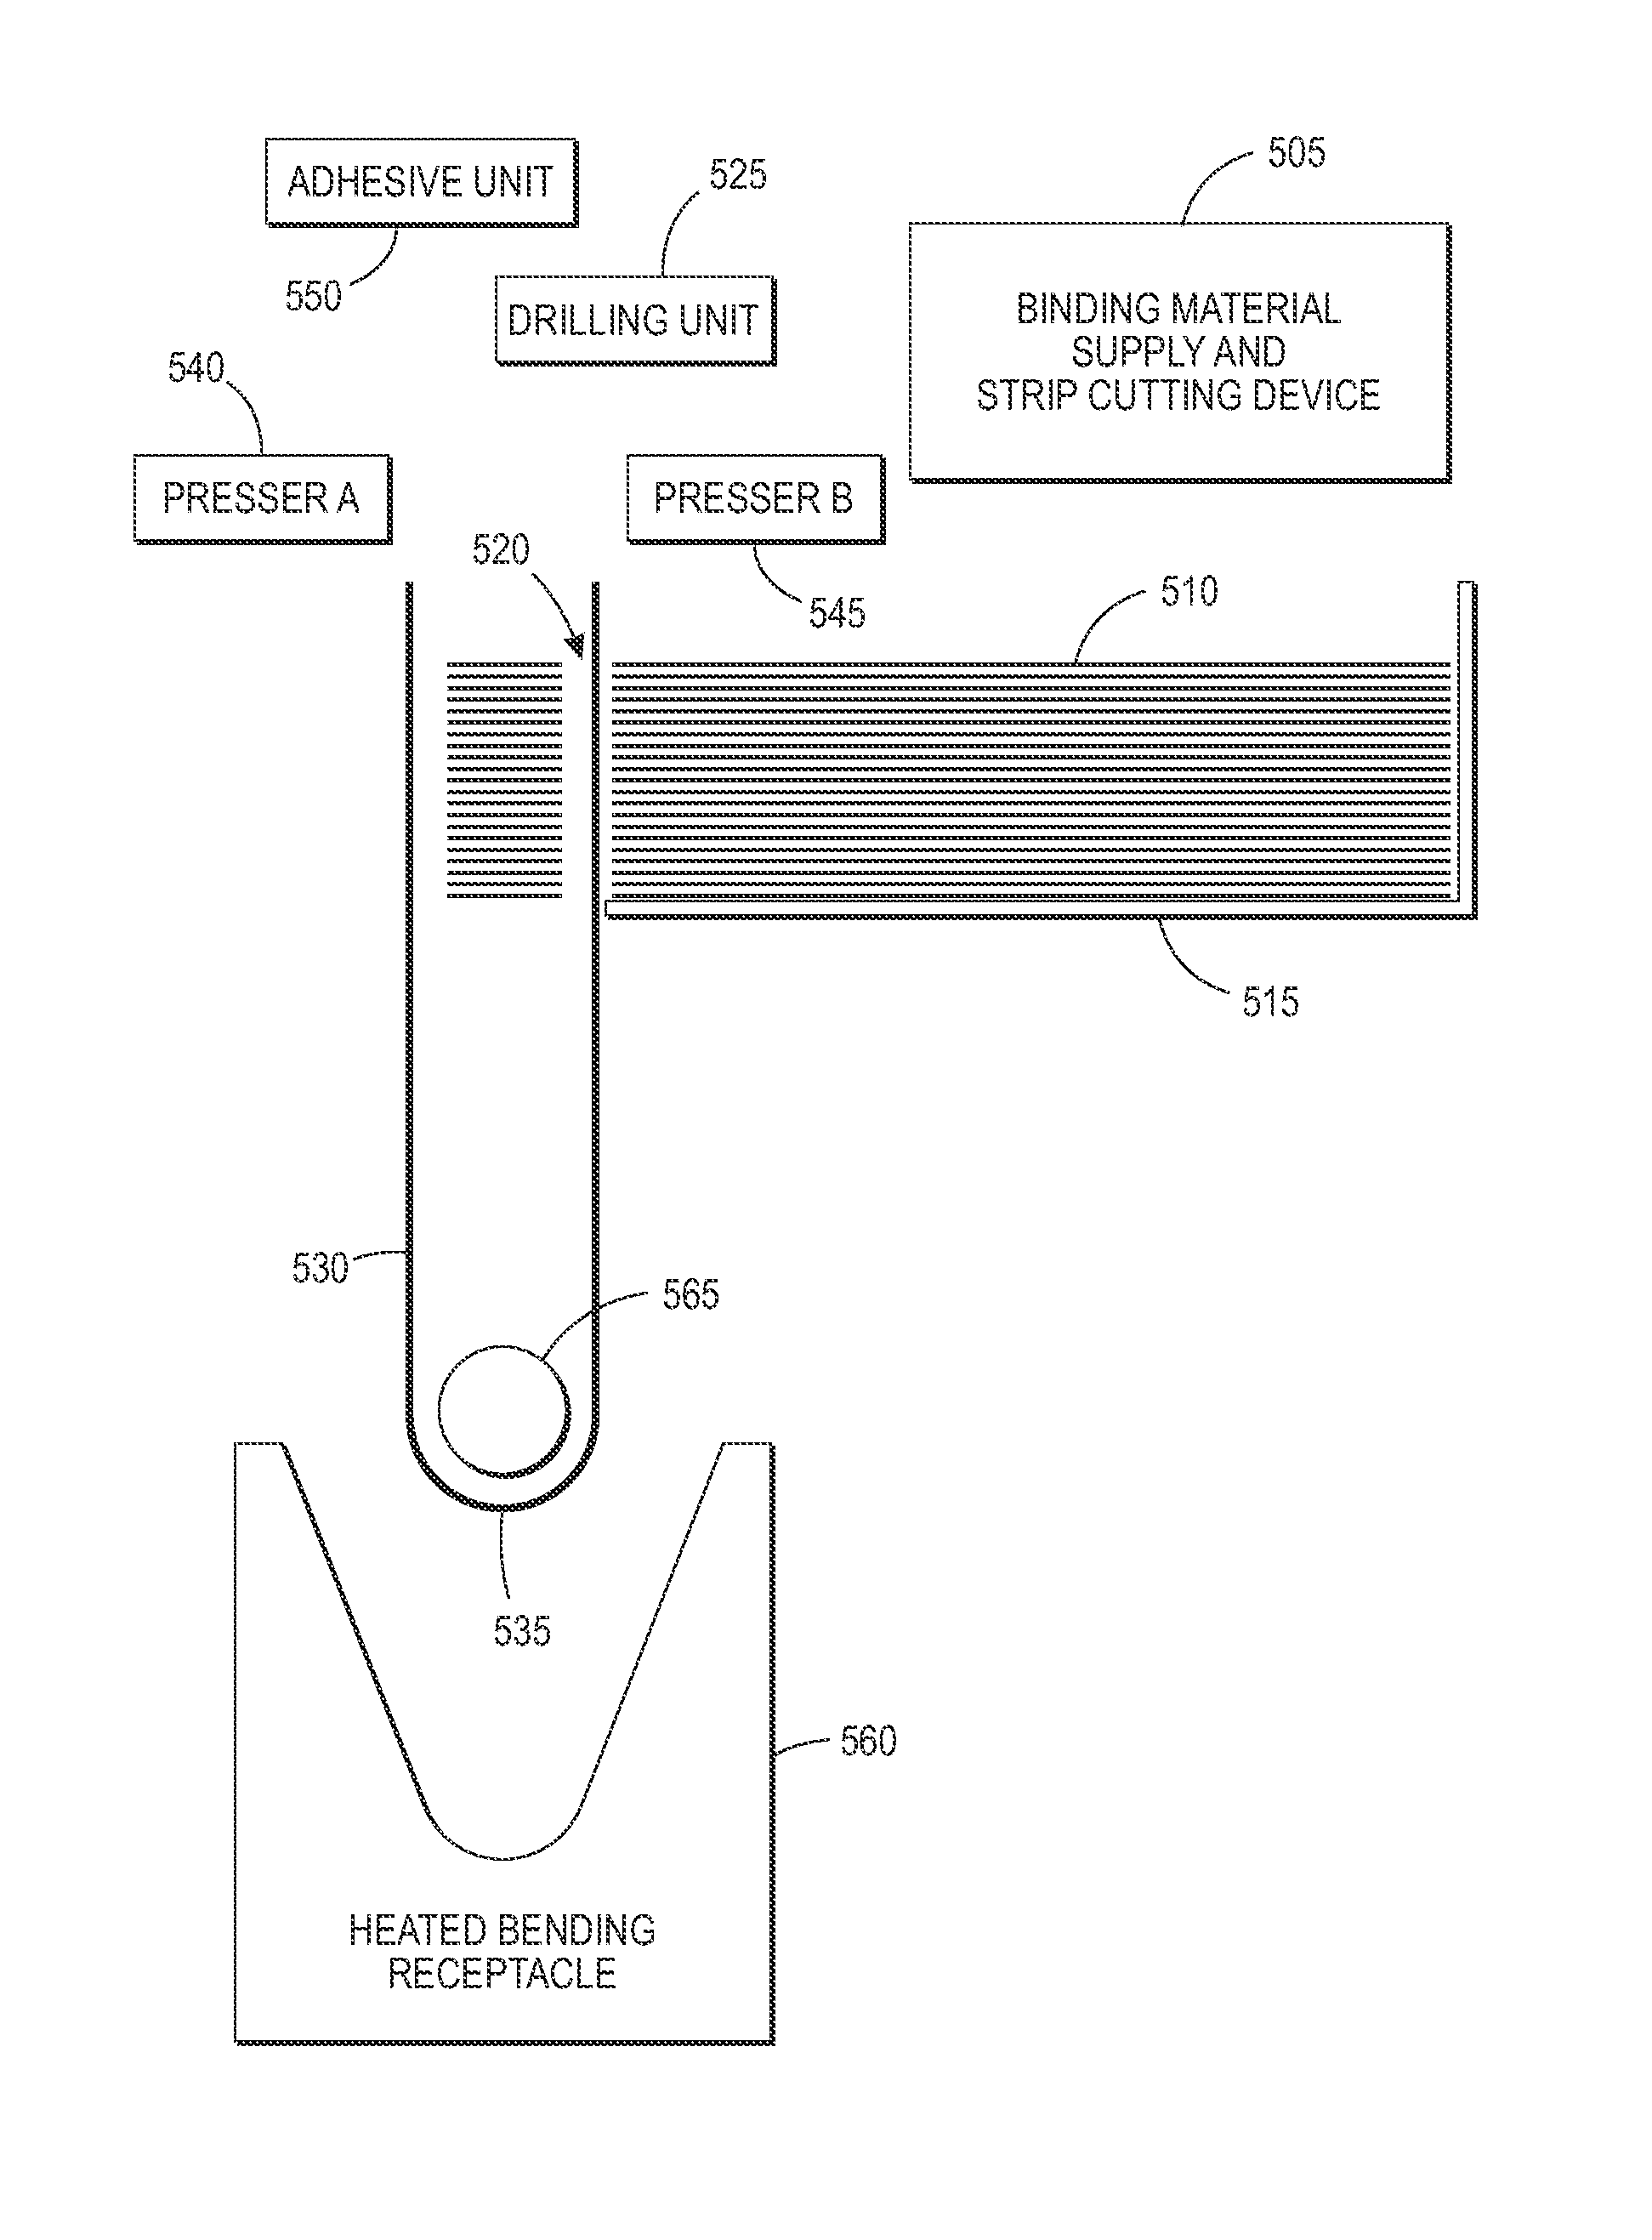 Systems and methods for forming and implementing book binding geometries as a function of stack thickness